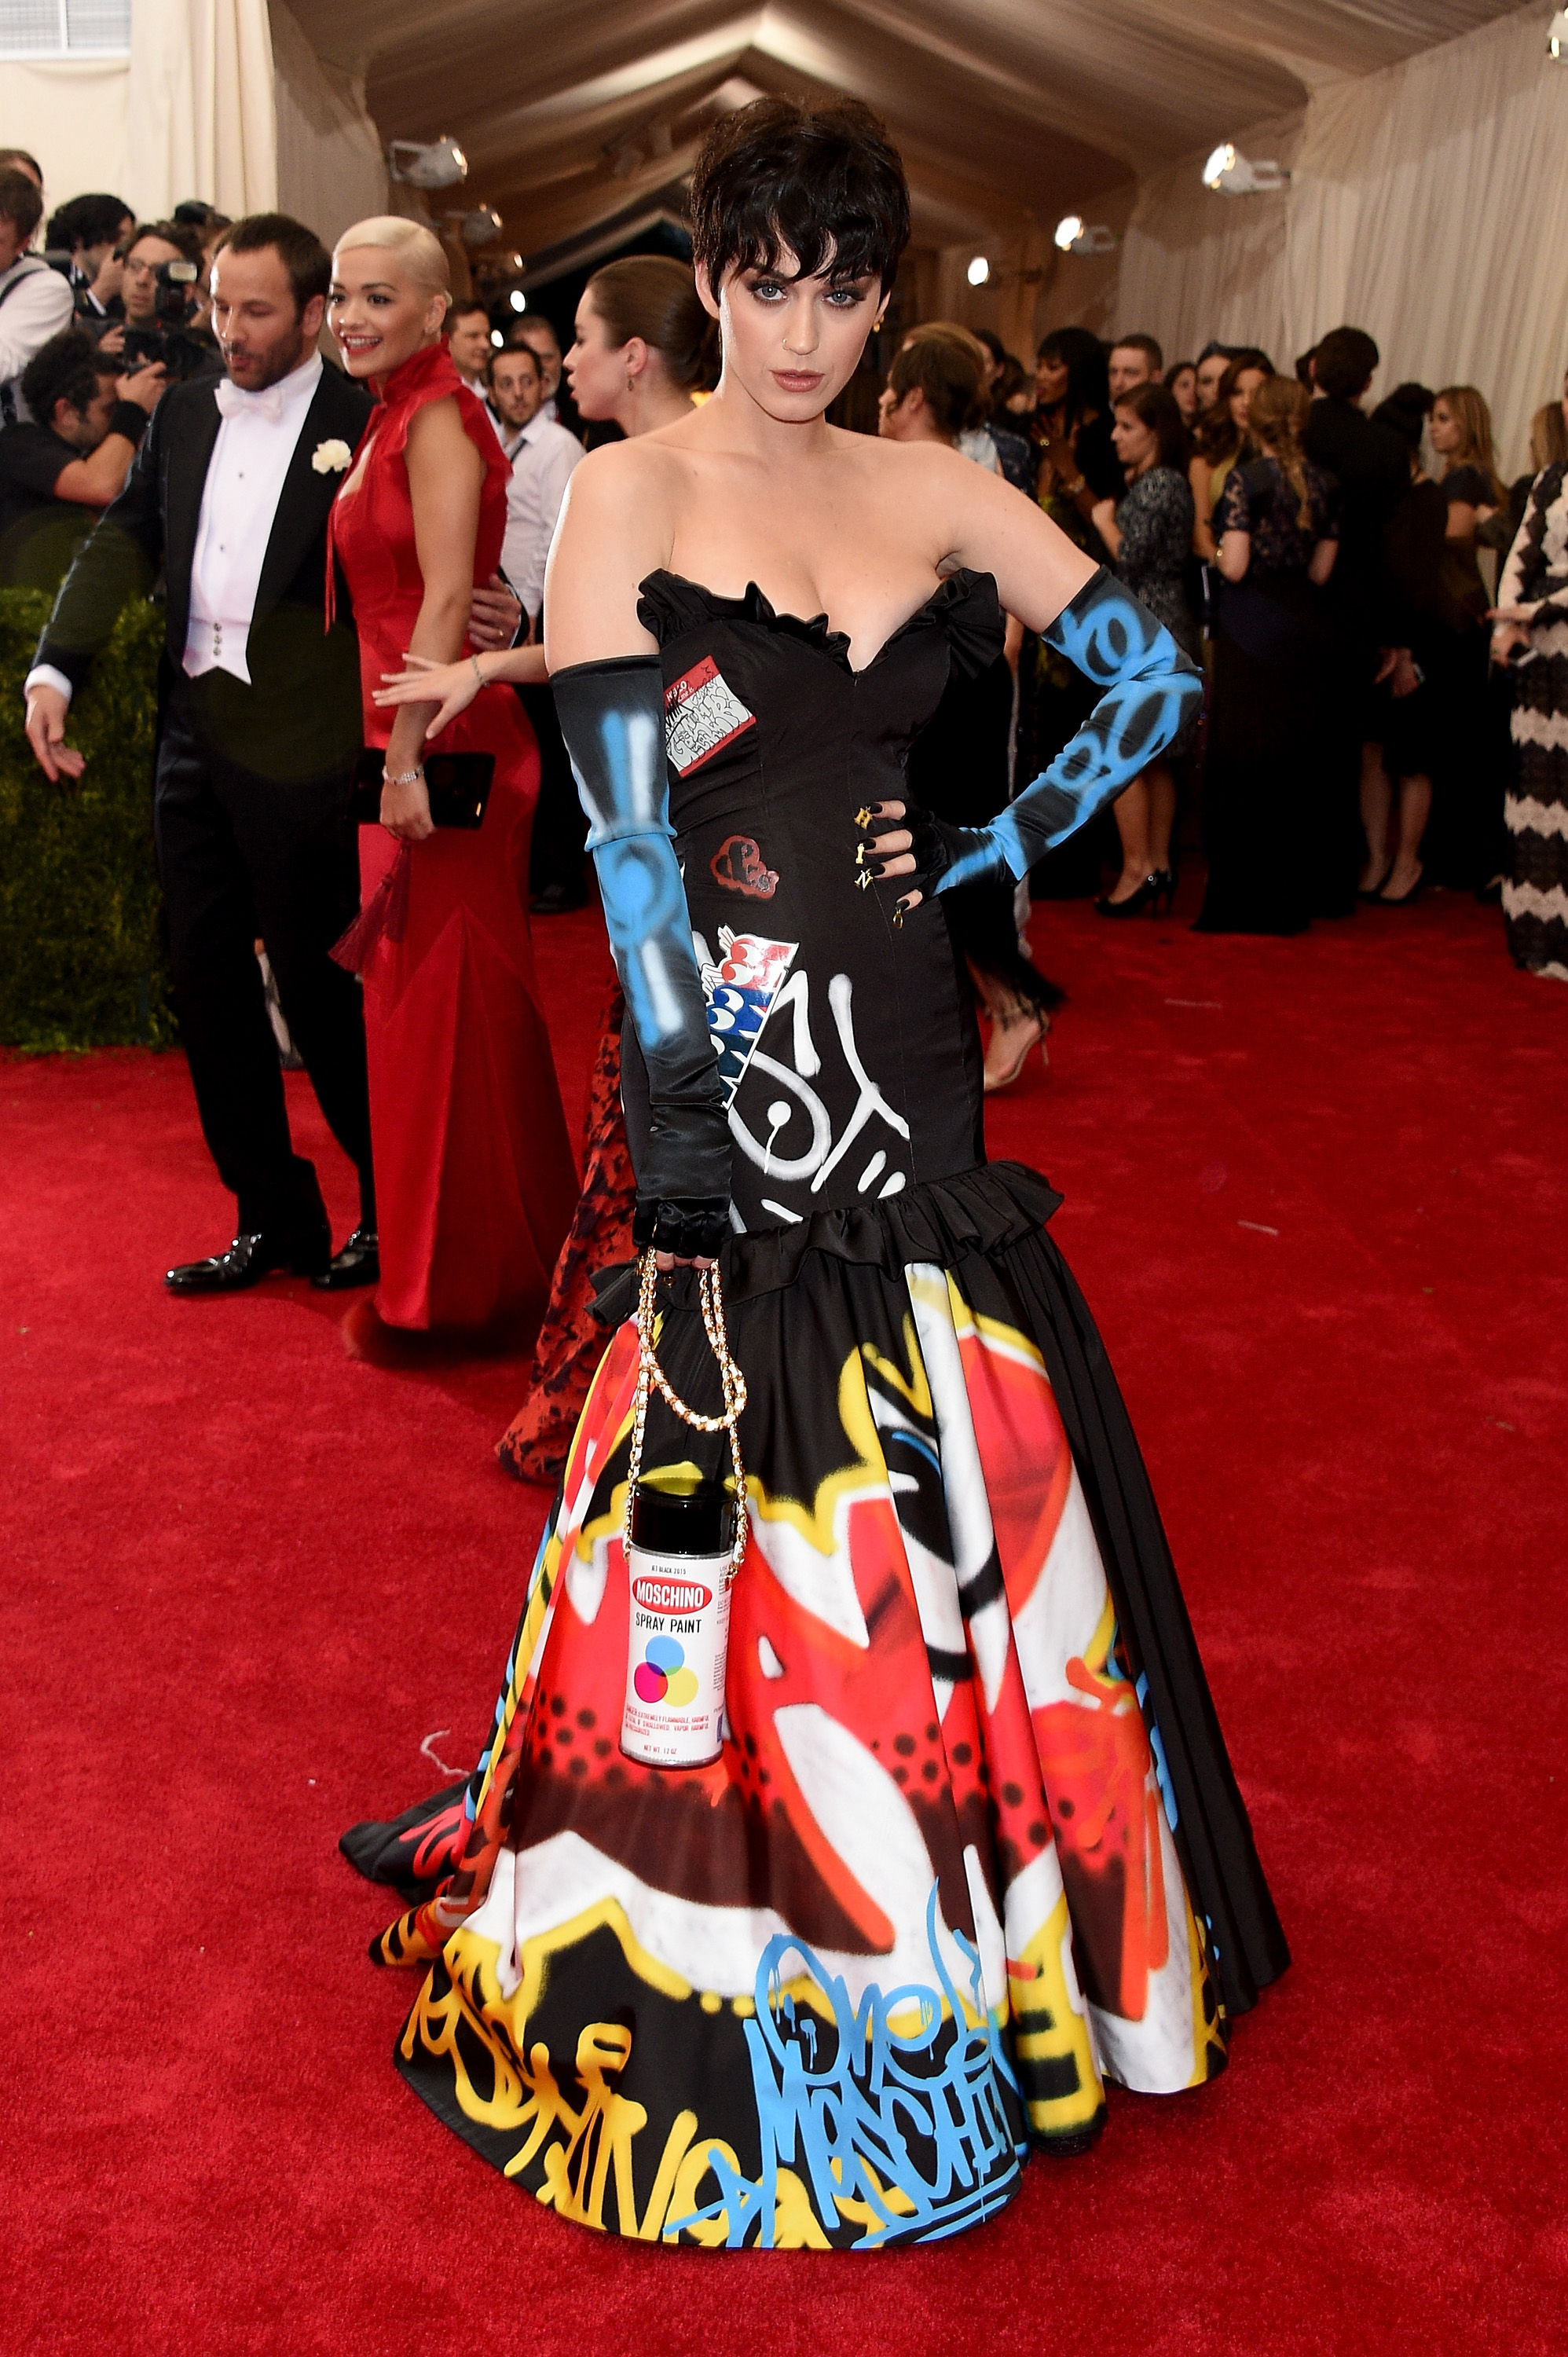 Katy Perry at the Metropolitan Museum of Art on May 4, 2015, in New York City. | Source: Getty Images